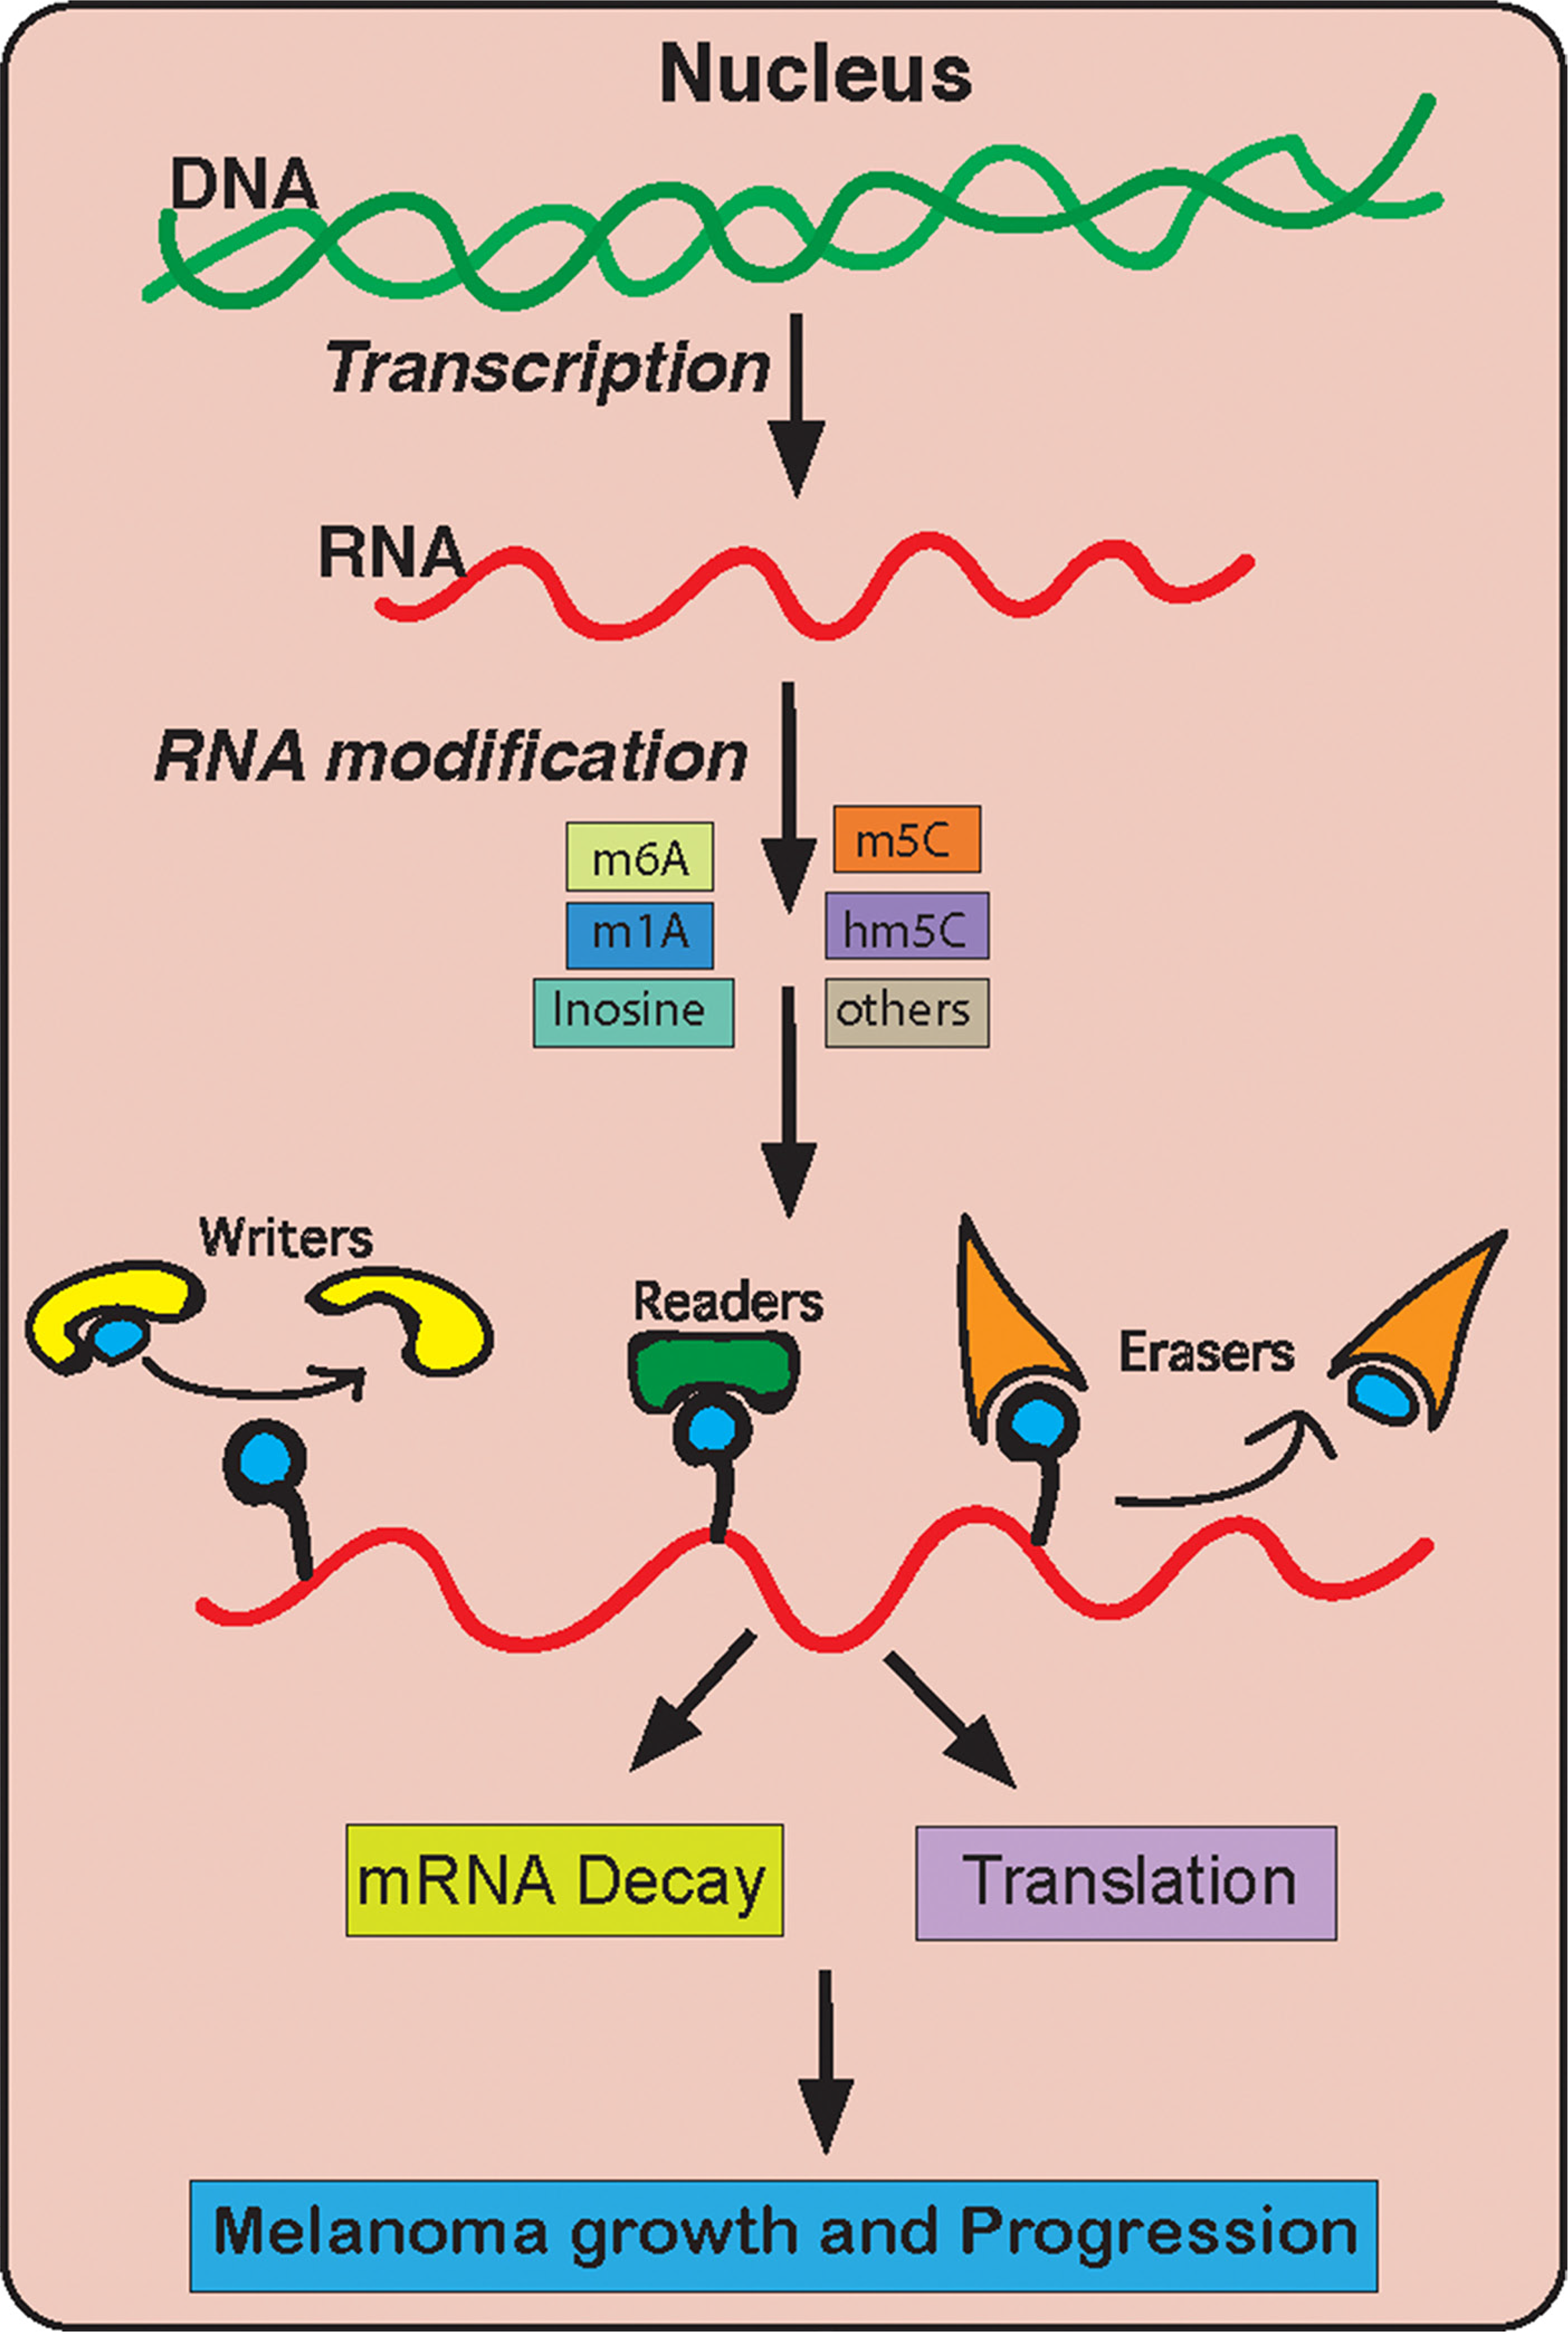 A model summarizing the role of RNA modification genes in melanoma growth and development.